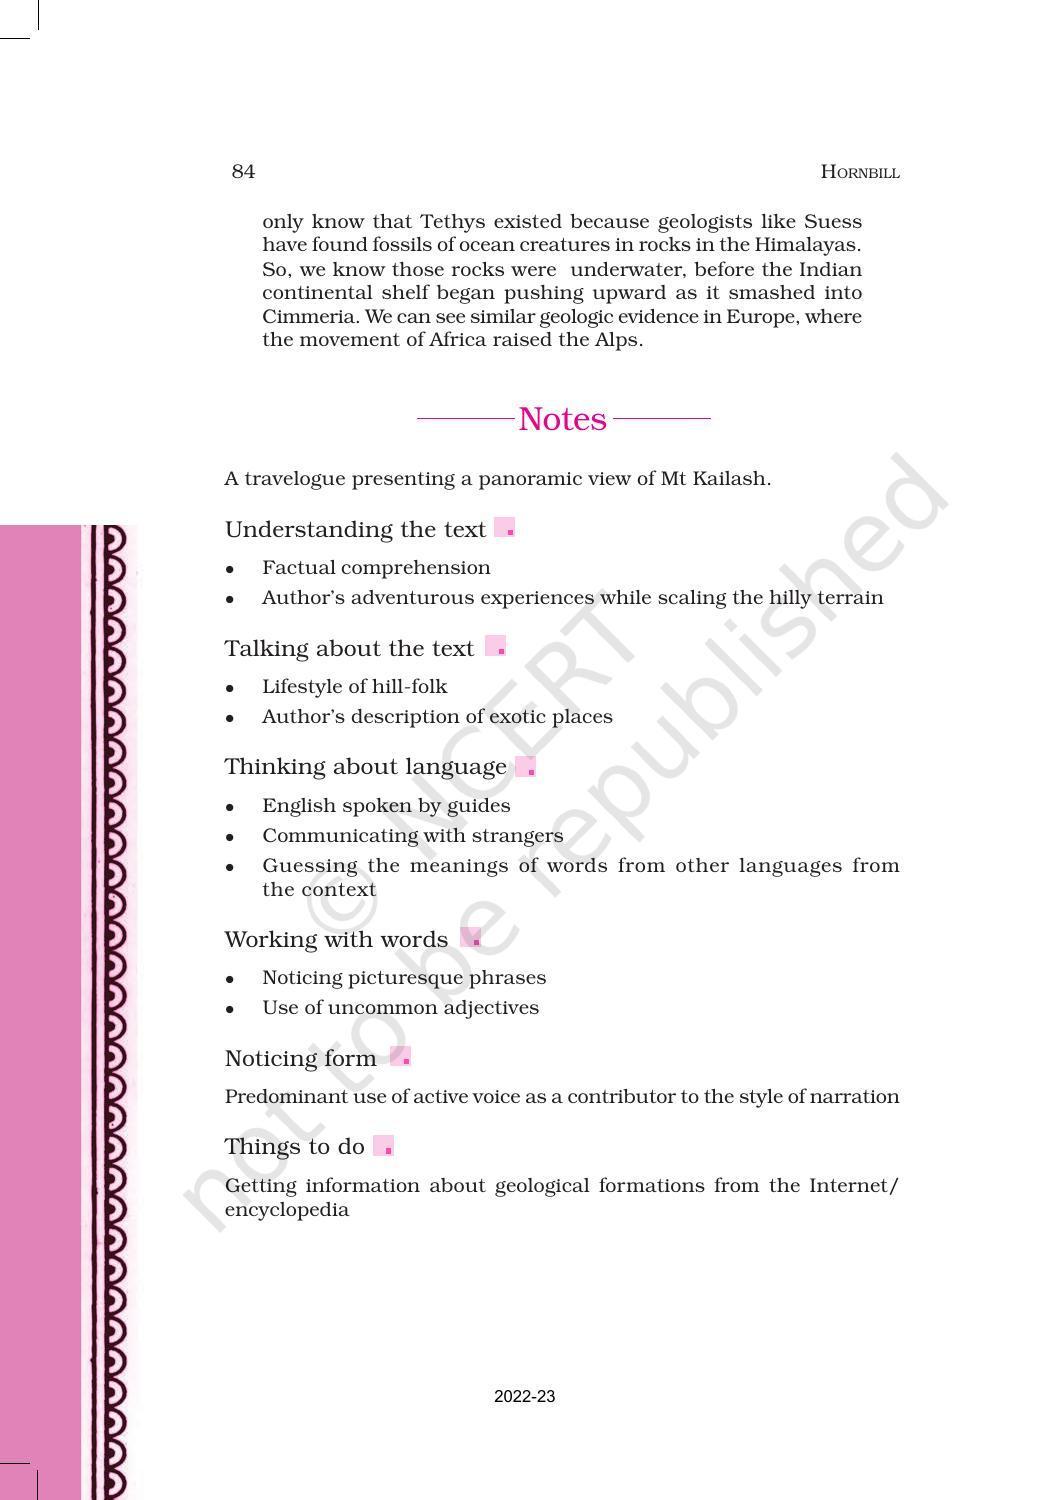 NCERT Book for Class 11 English Hornbill Chapter 8 Silk Road - Page 11